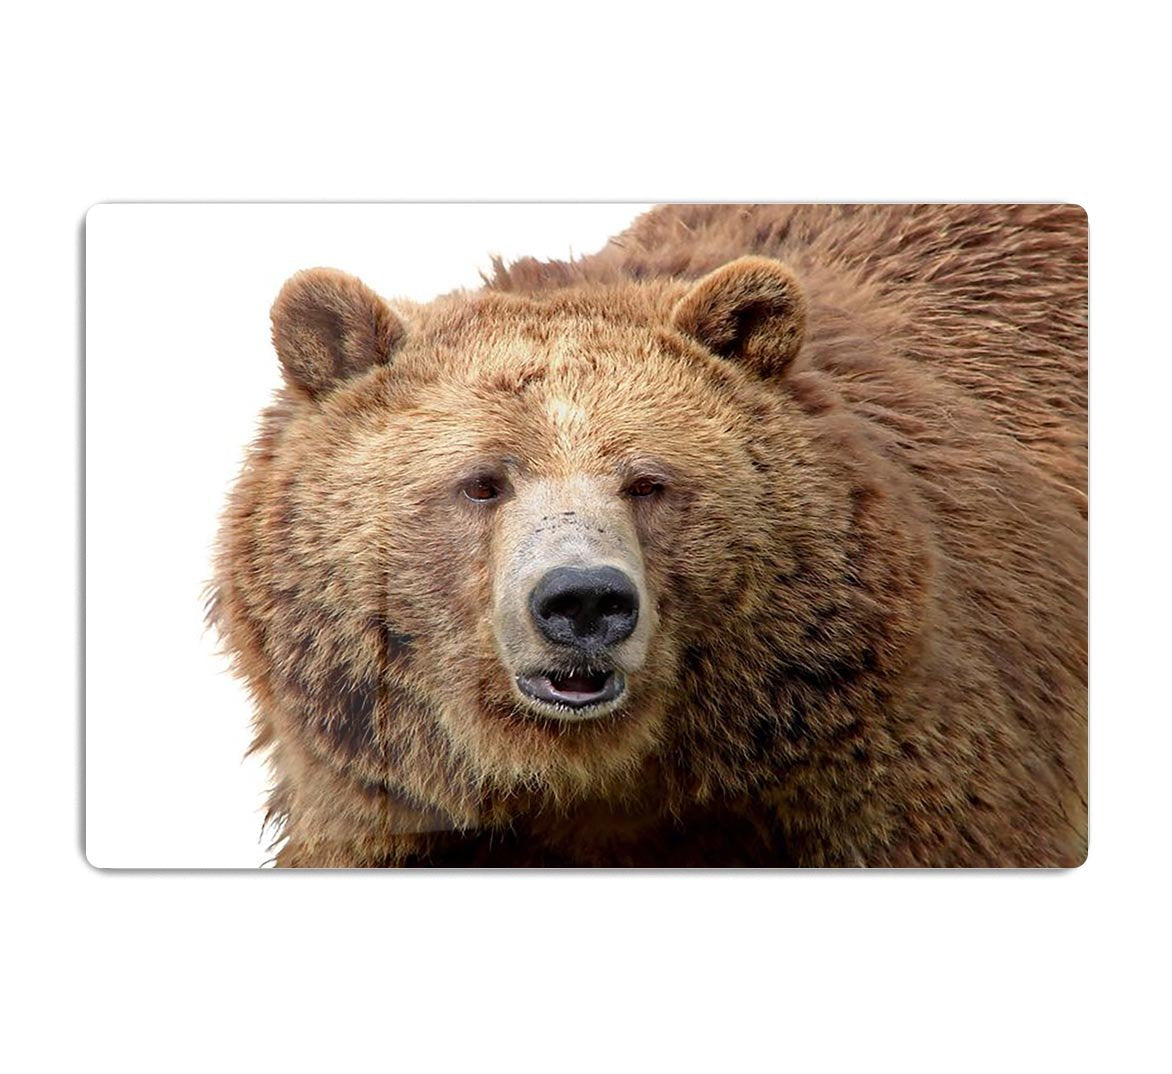 Detailed close-up portrait of a magnificent grizzly brown bear HD Metal Print - Canvas Art Rocks - 1